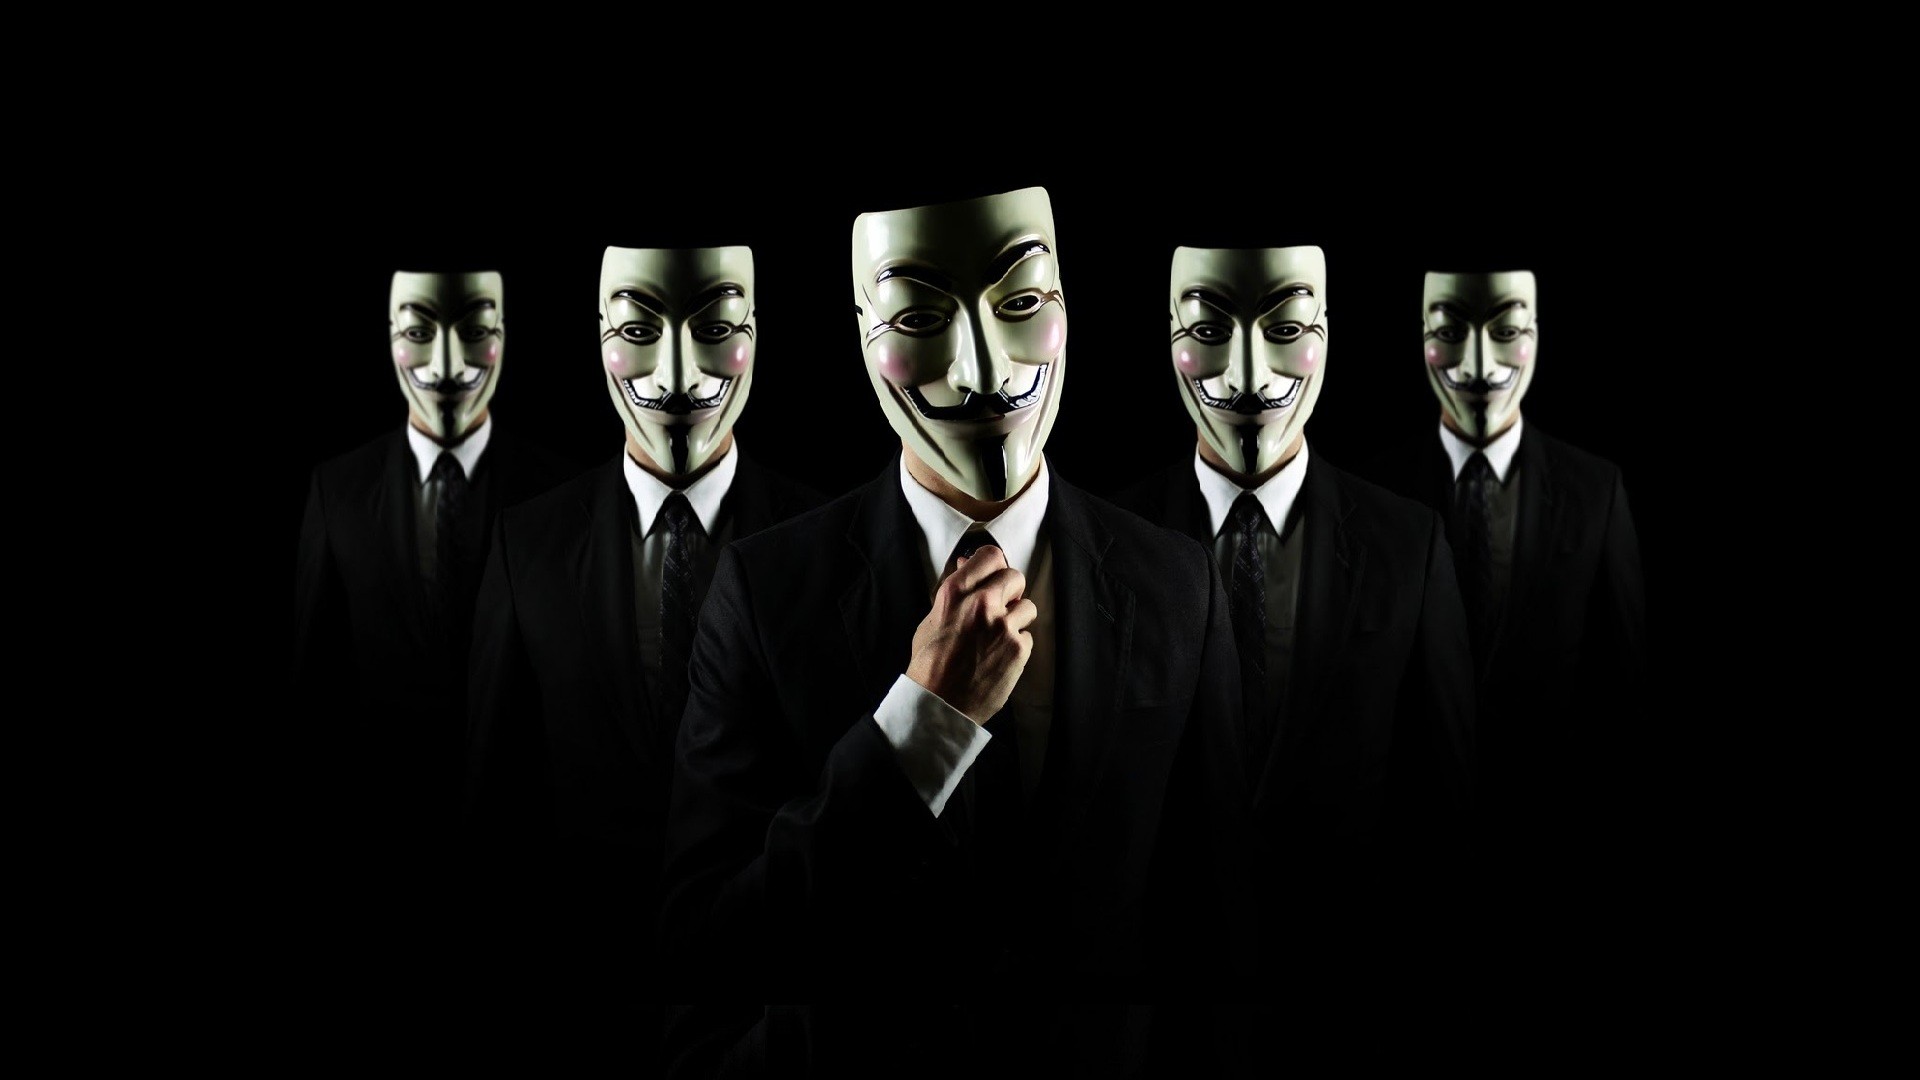 #OpDutchPirateBay – Anonymous threatens to attack The Netherlands